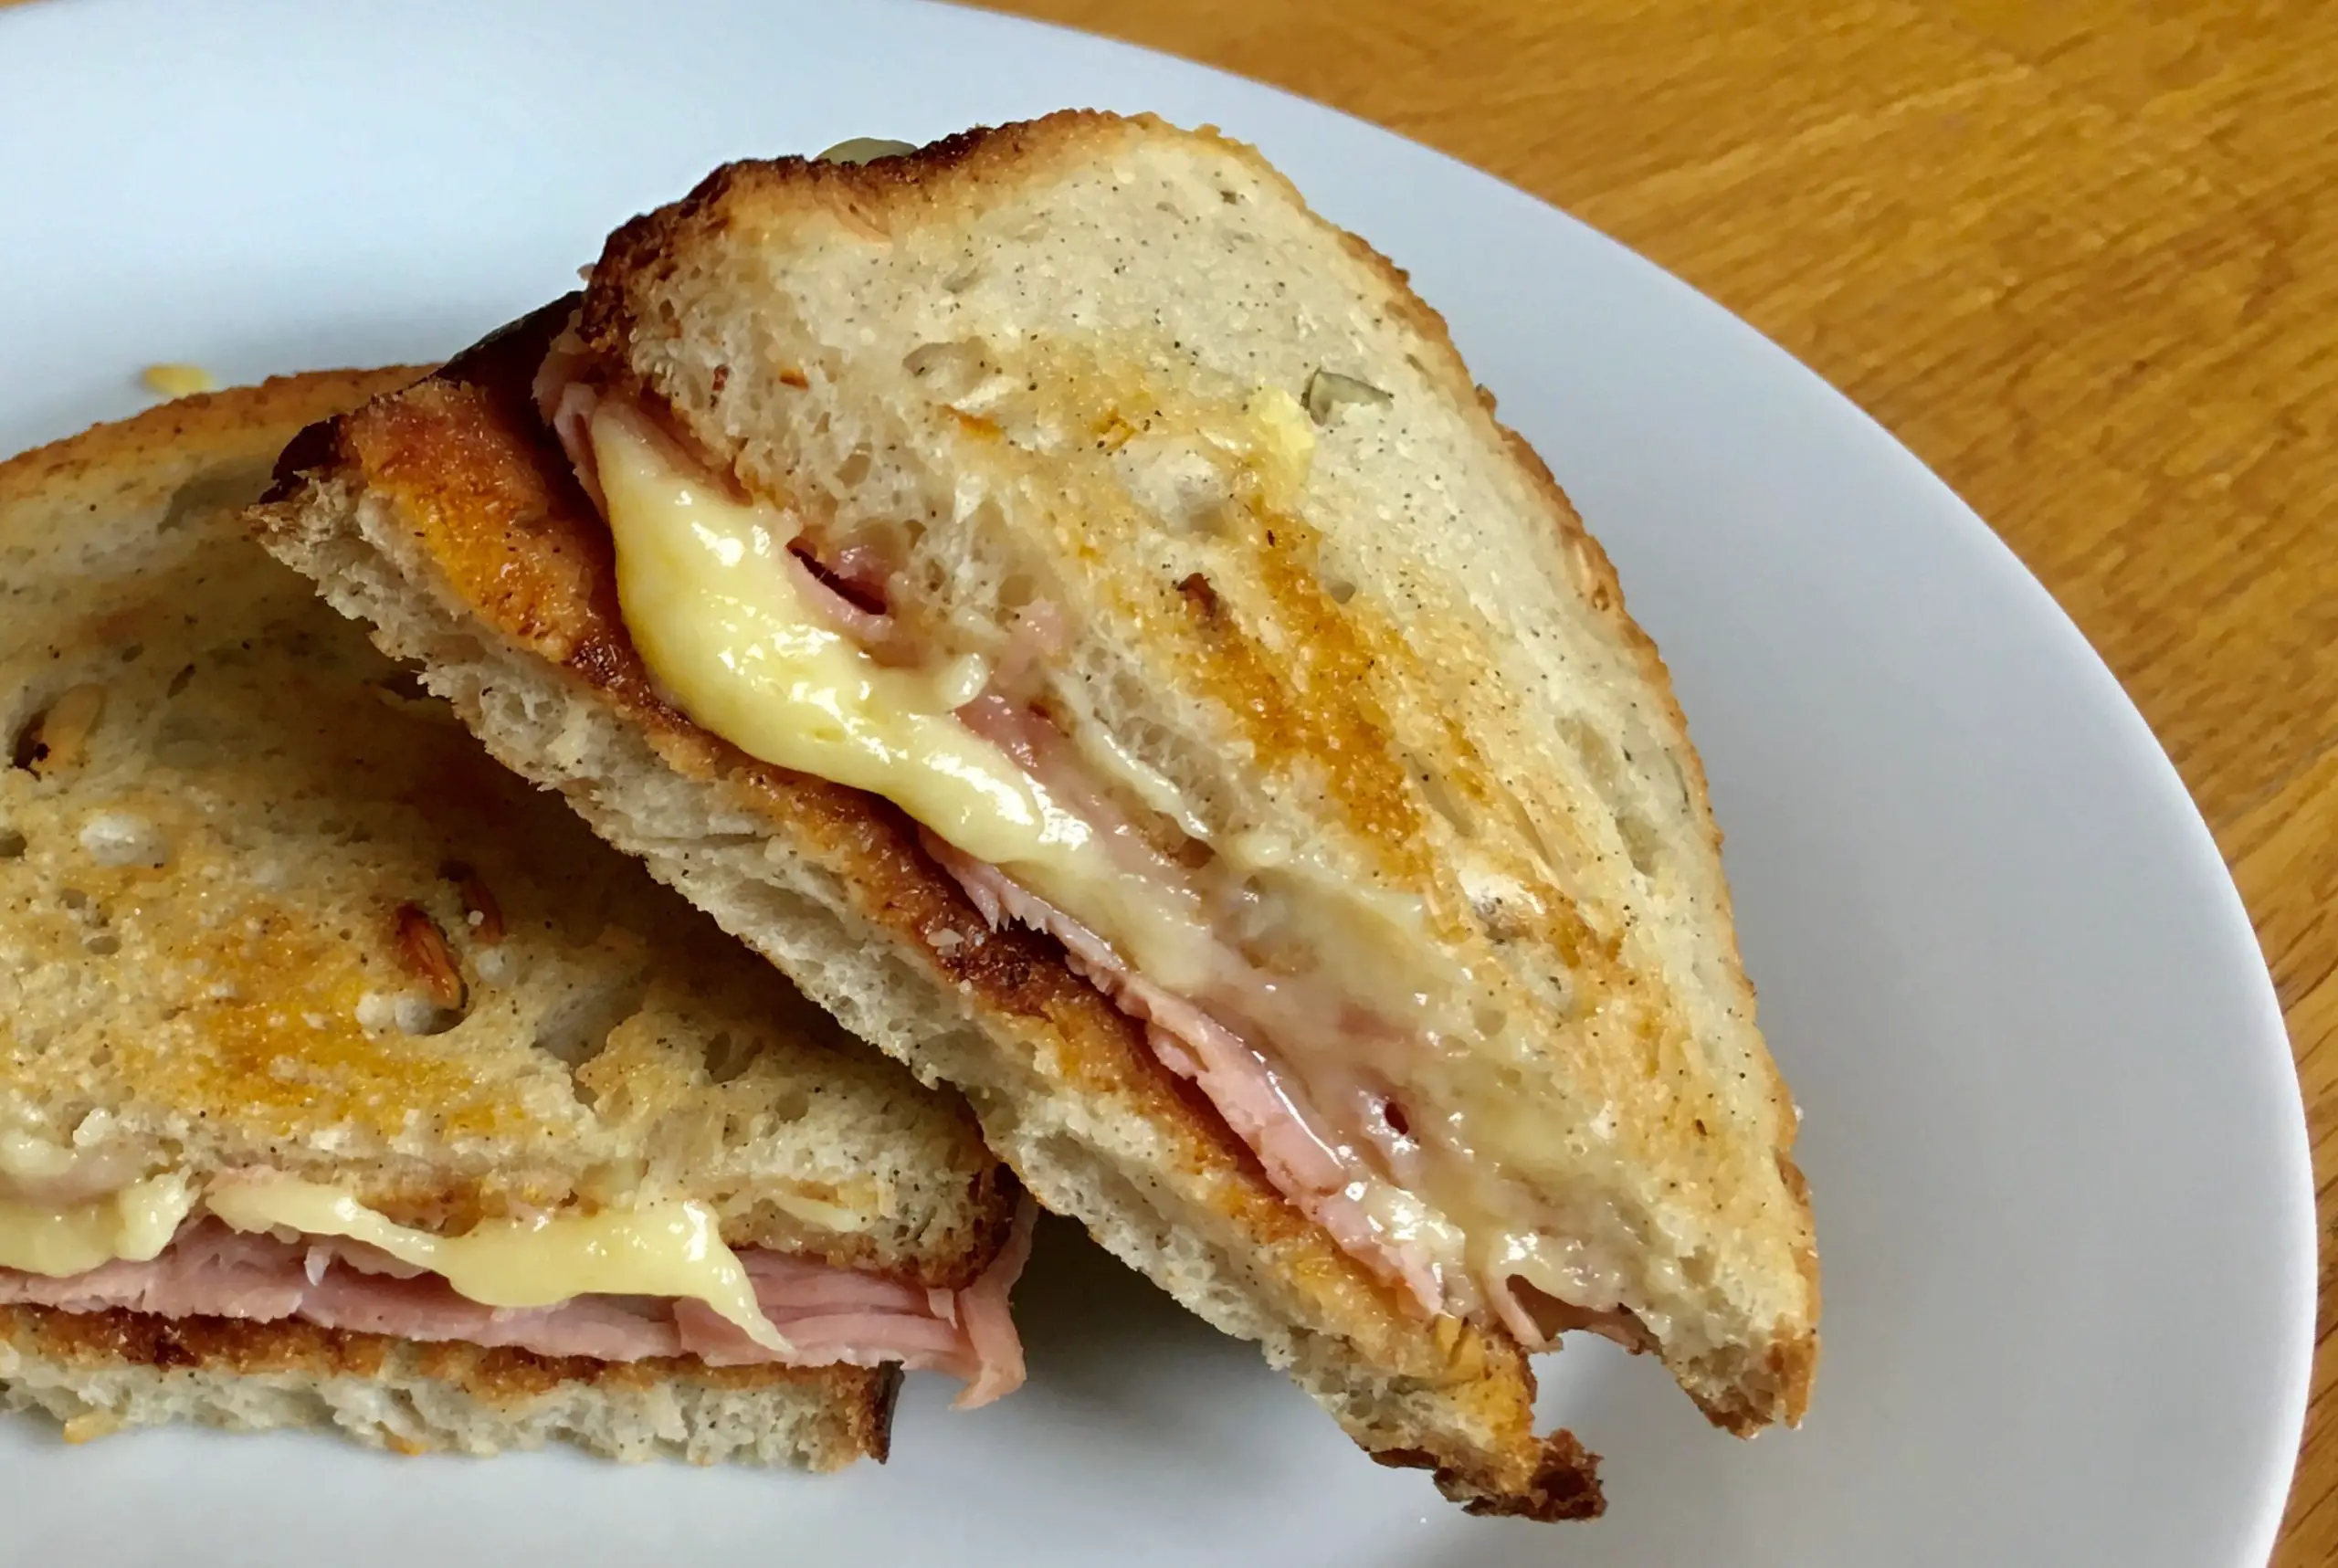 Classic grilled cheese and ham sandwich